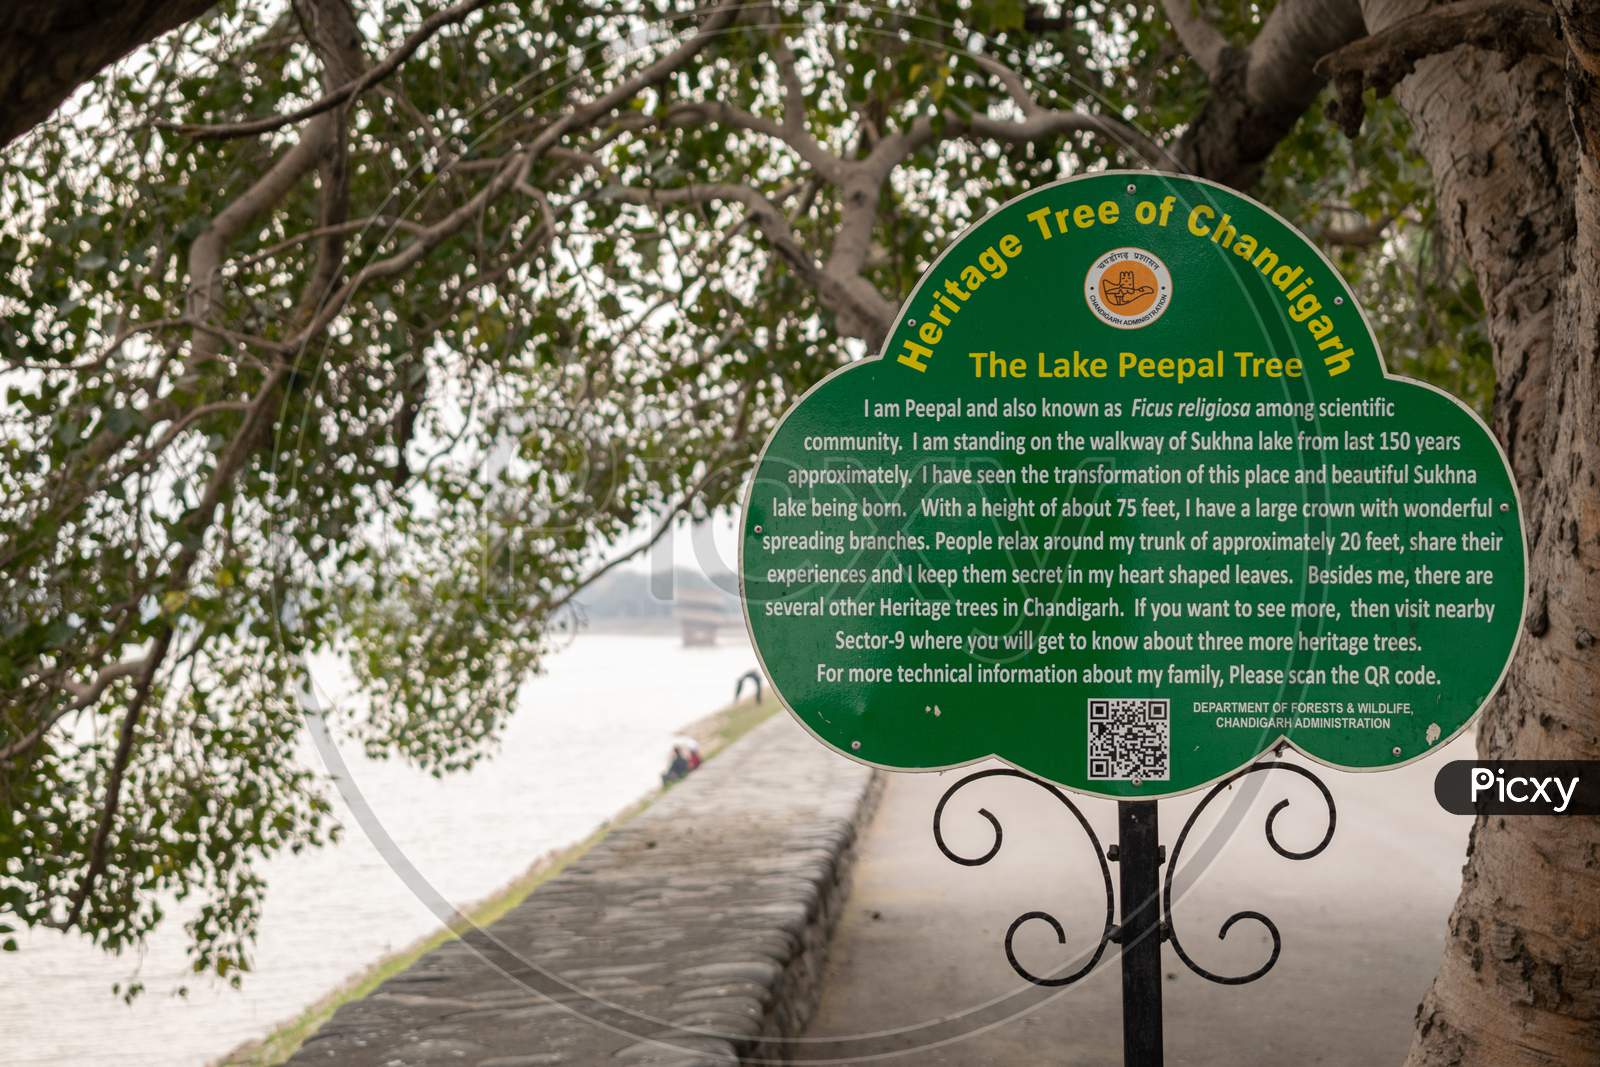 A information board showing the lake peepal tree as a Heritage tree of Chandigarh